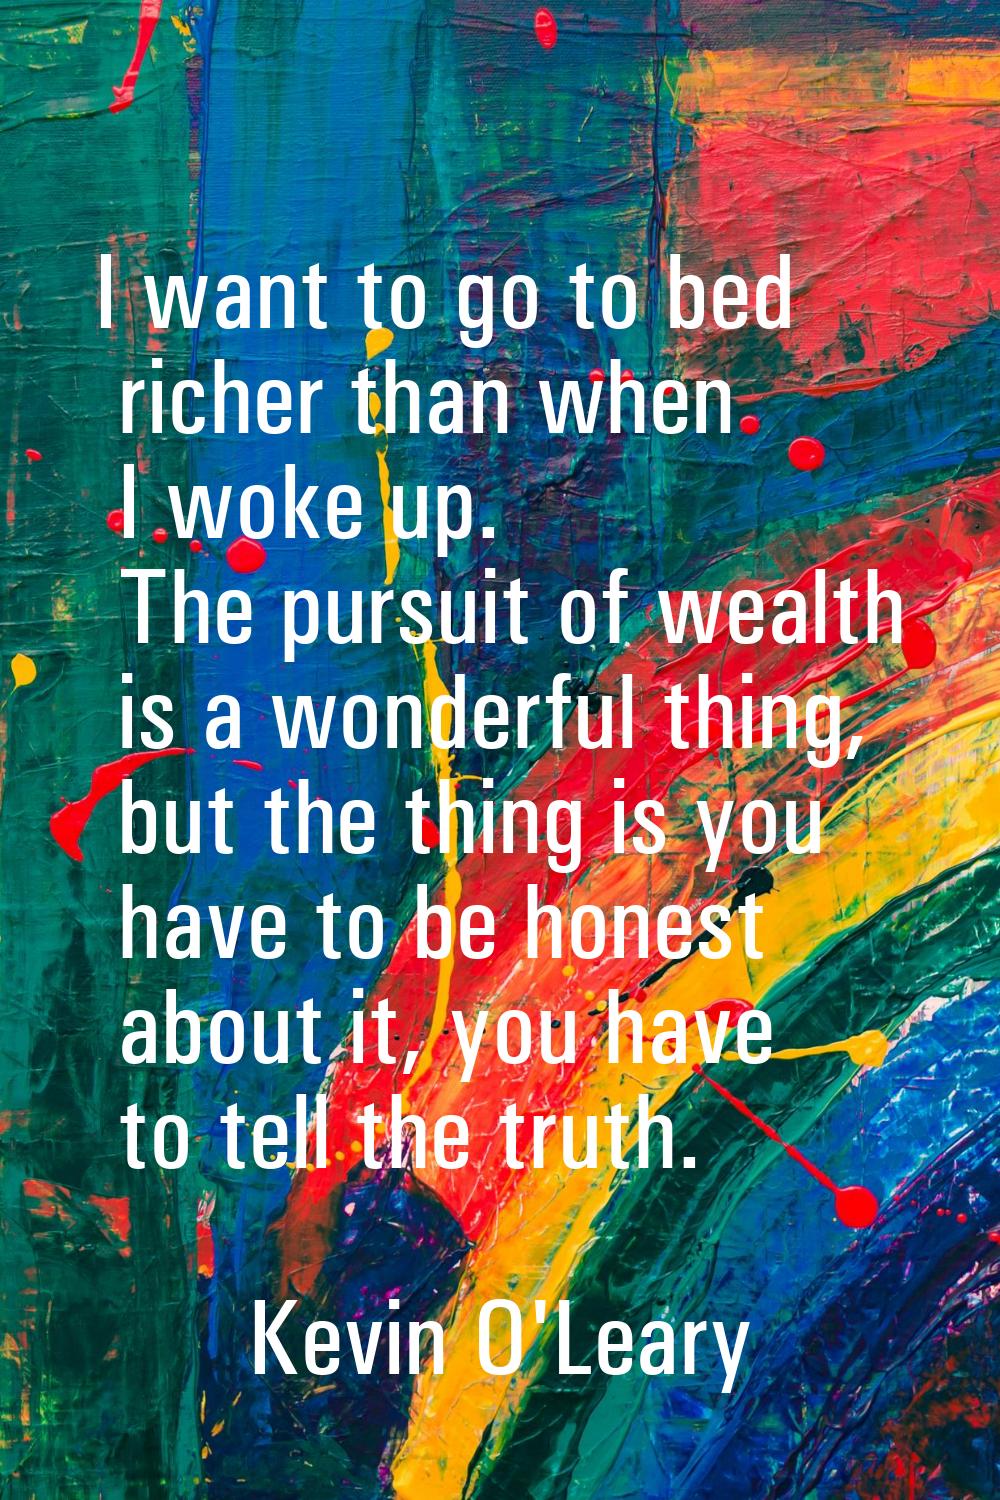 I want to go to bed richer than when I woke up. The pursuit of wealth is a wonderful thing, but the